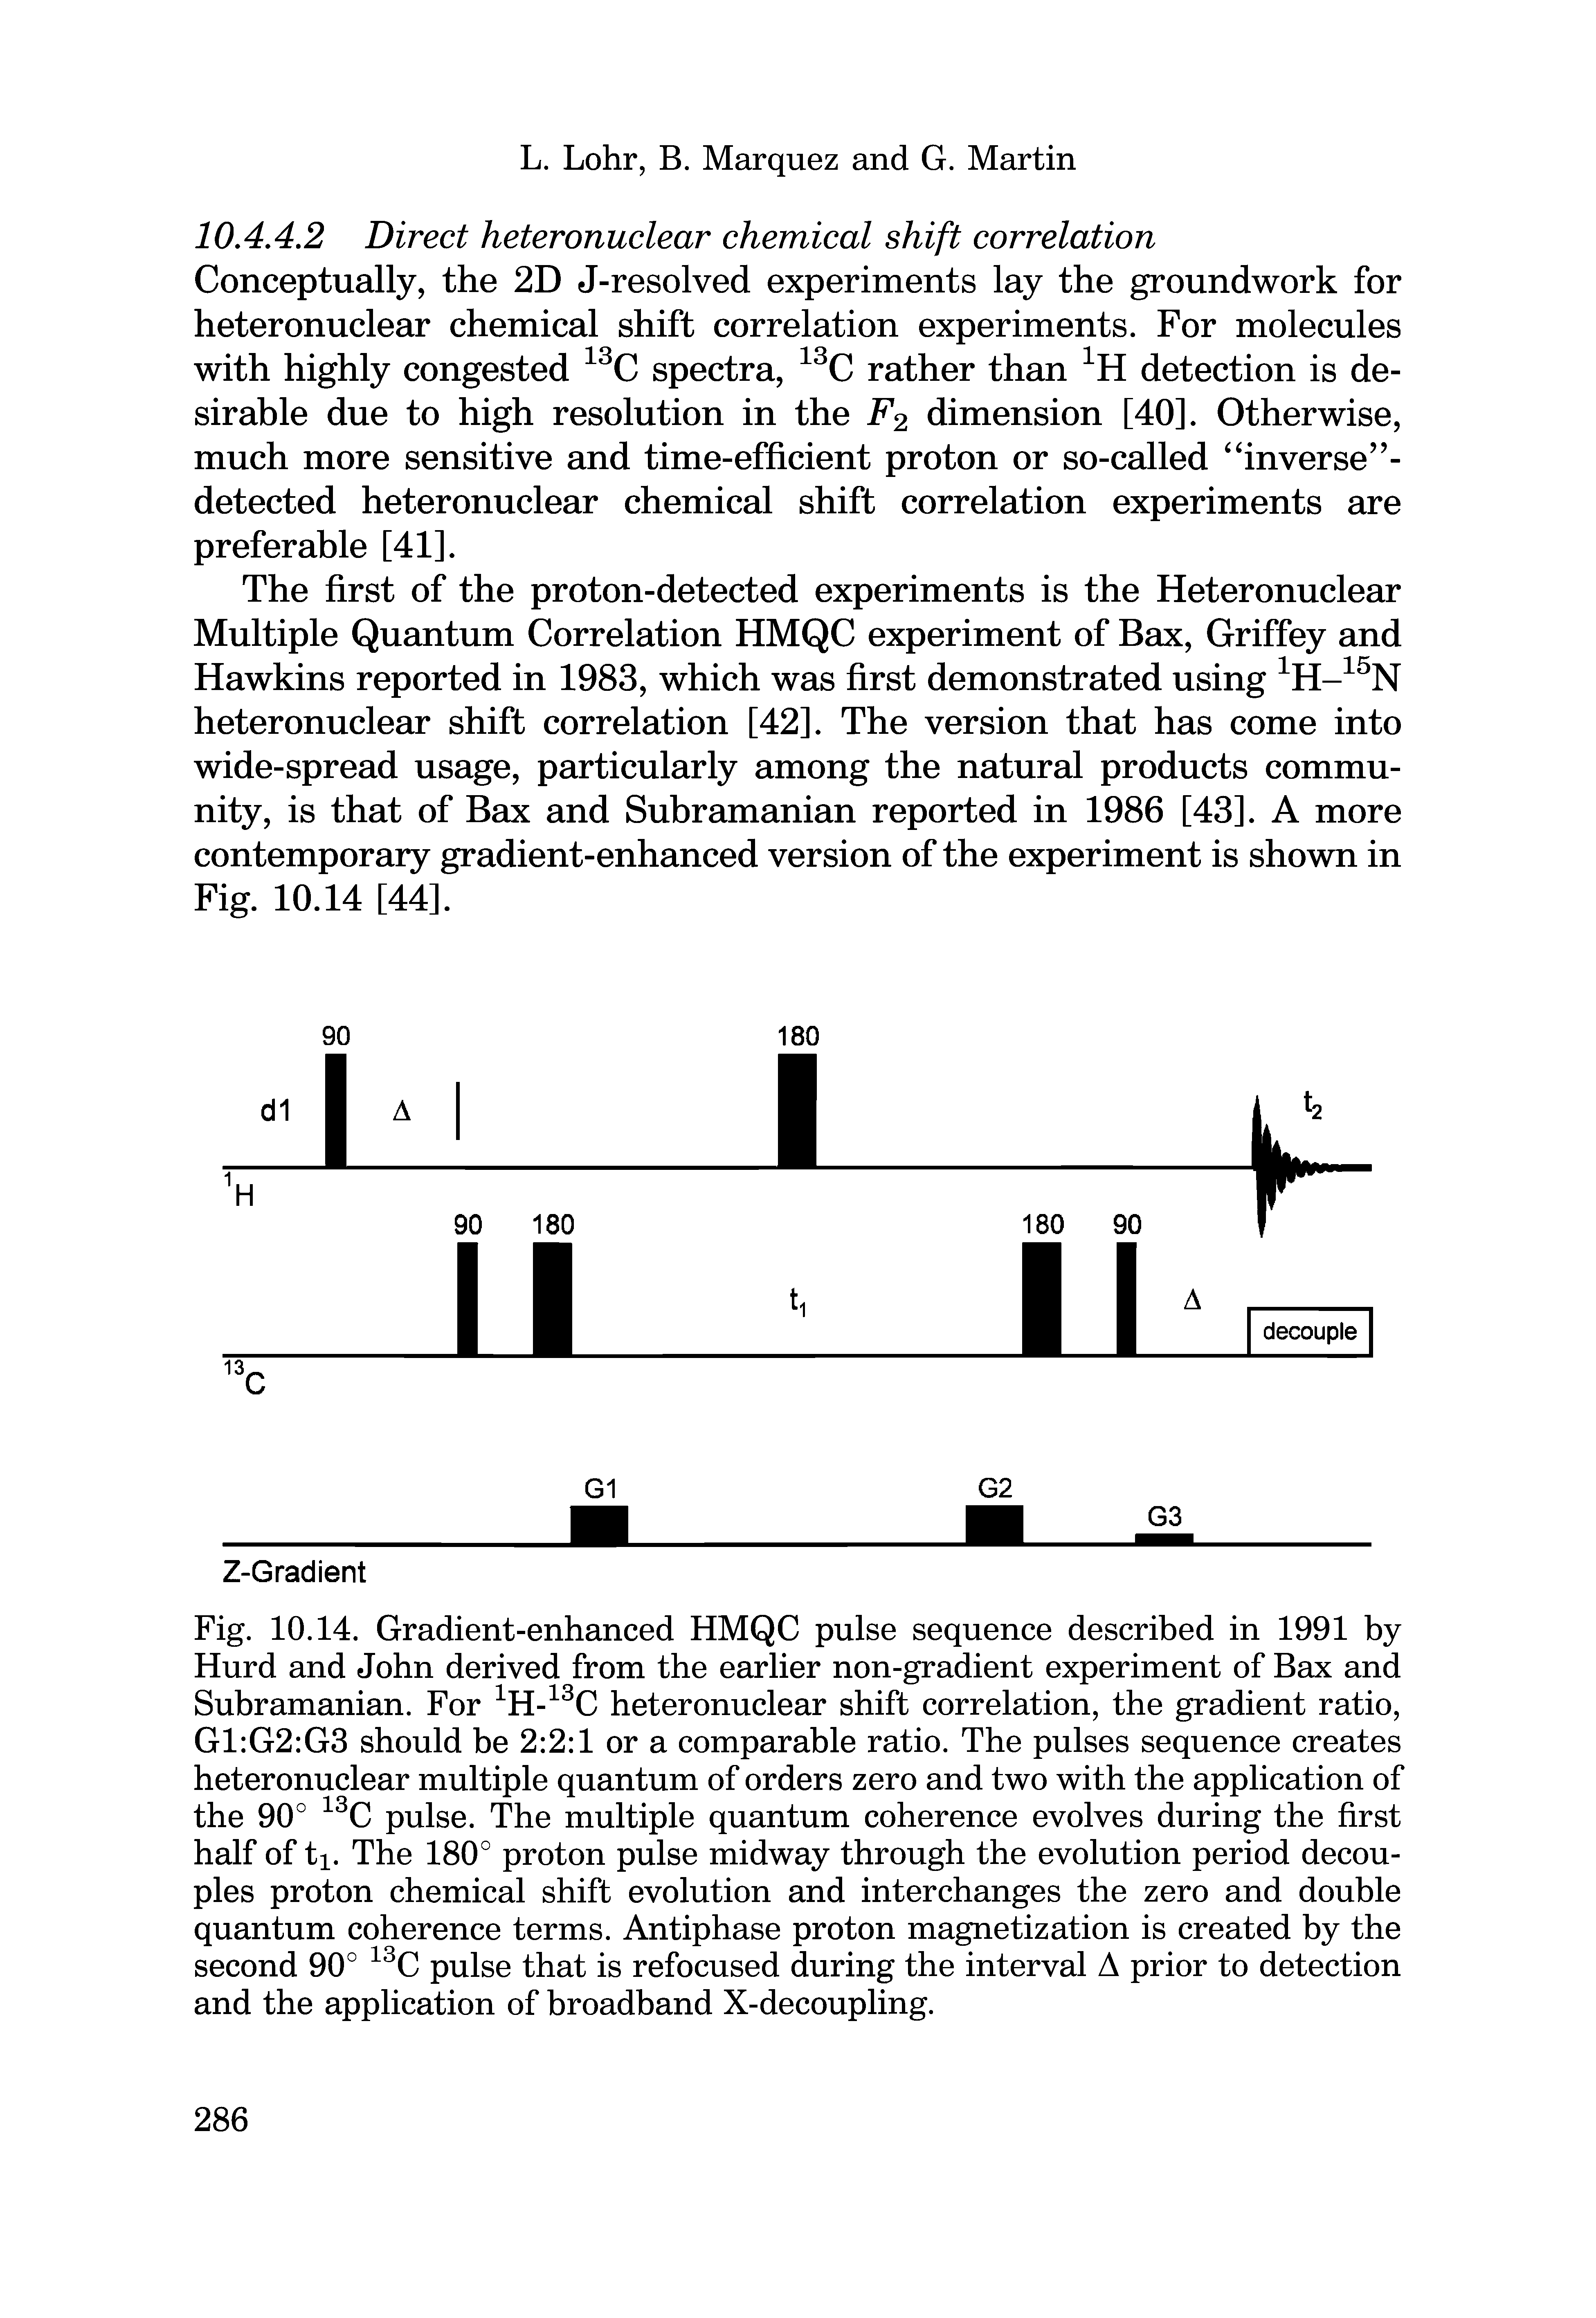 Fig. 10.14. Gradient-enhanced HMQC pulse sequence described in 1991 by Hurd and John derived from the earlier non-gradient experiment of Bax and Subramanian. For 1H-13C heteronuclear shift correlation, the gradient ratio, G1 G2 G3 should be 2 2 1 or a comparable ratio. The pulses sequence creates heteronuclear multiple quantum of orders zero and two with the application of the 90° 13C pulse. The multiple quantum coherence evolves during the first half of ti. The 180° proton pulse midway through the evolution period decouples proton chemical shift evolution and interchanges the zero and double quantum coherence terms. Antiphase proton magnetization is created by the second 90° 13C pulse that is refocused during the interval A prior to detection and the application of broadband X-decoupling.